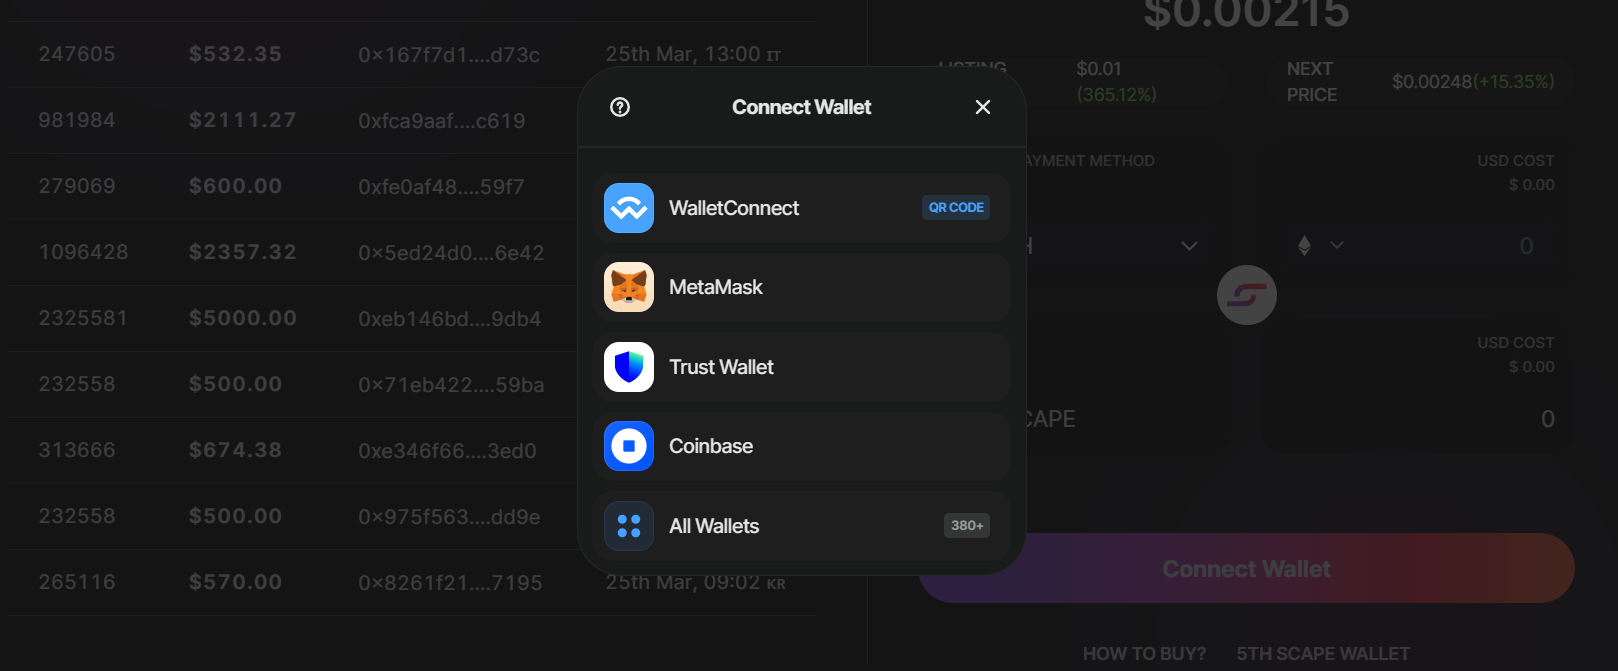 Connect Wallet to buy 5thScape